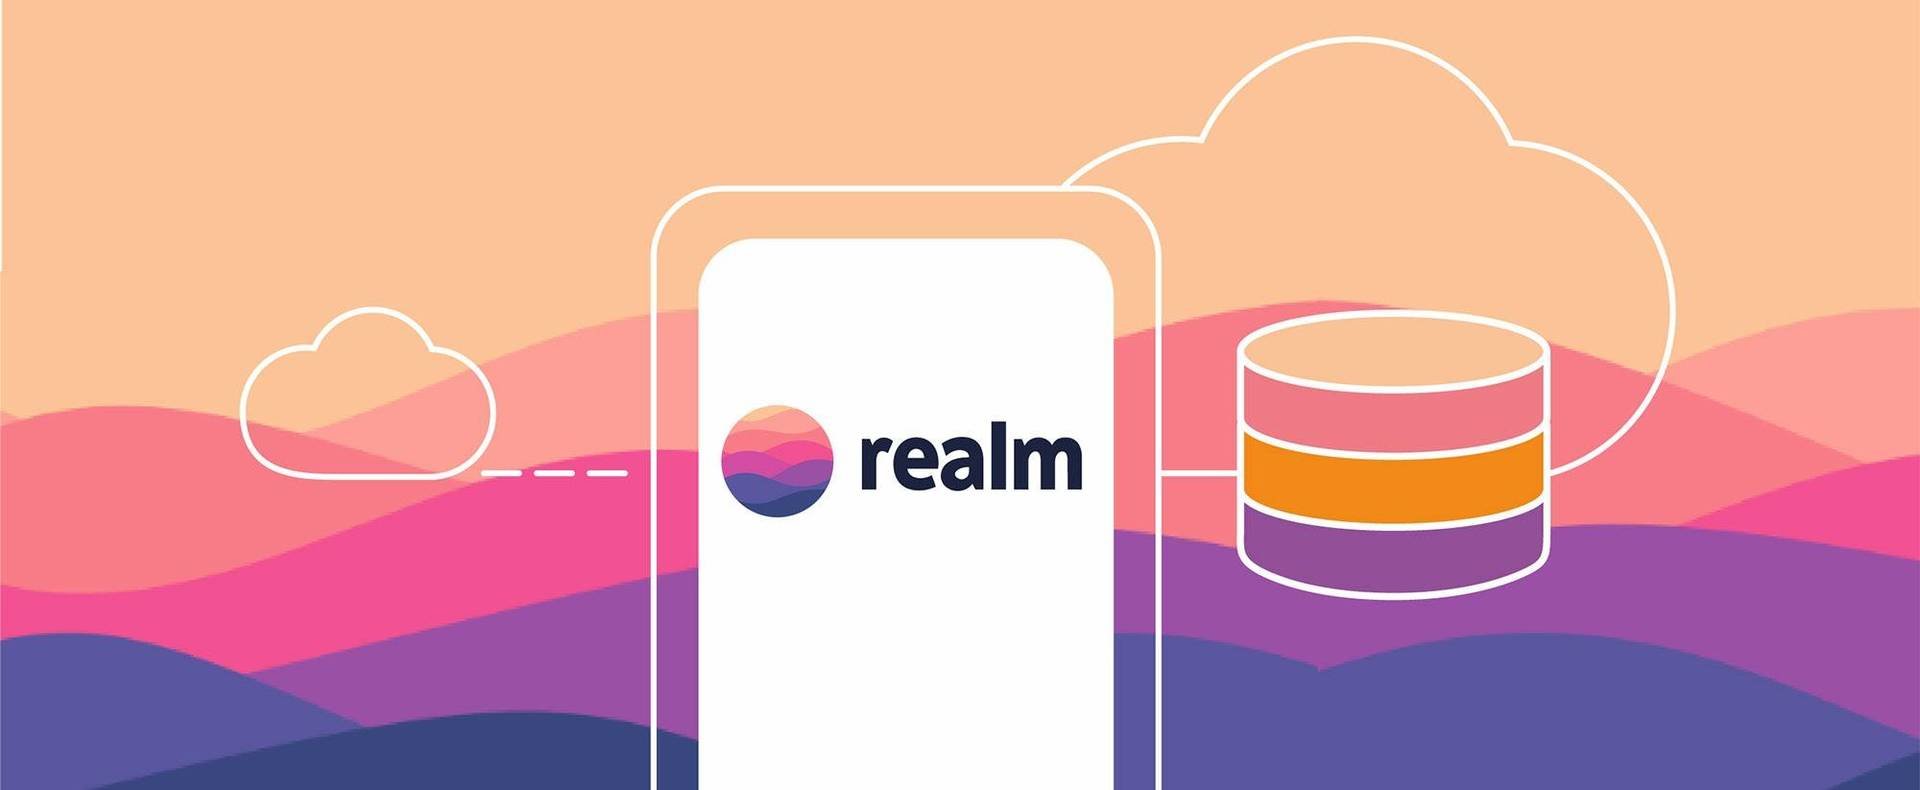 Realm database